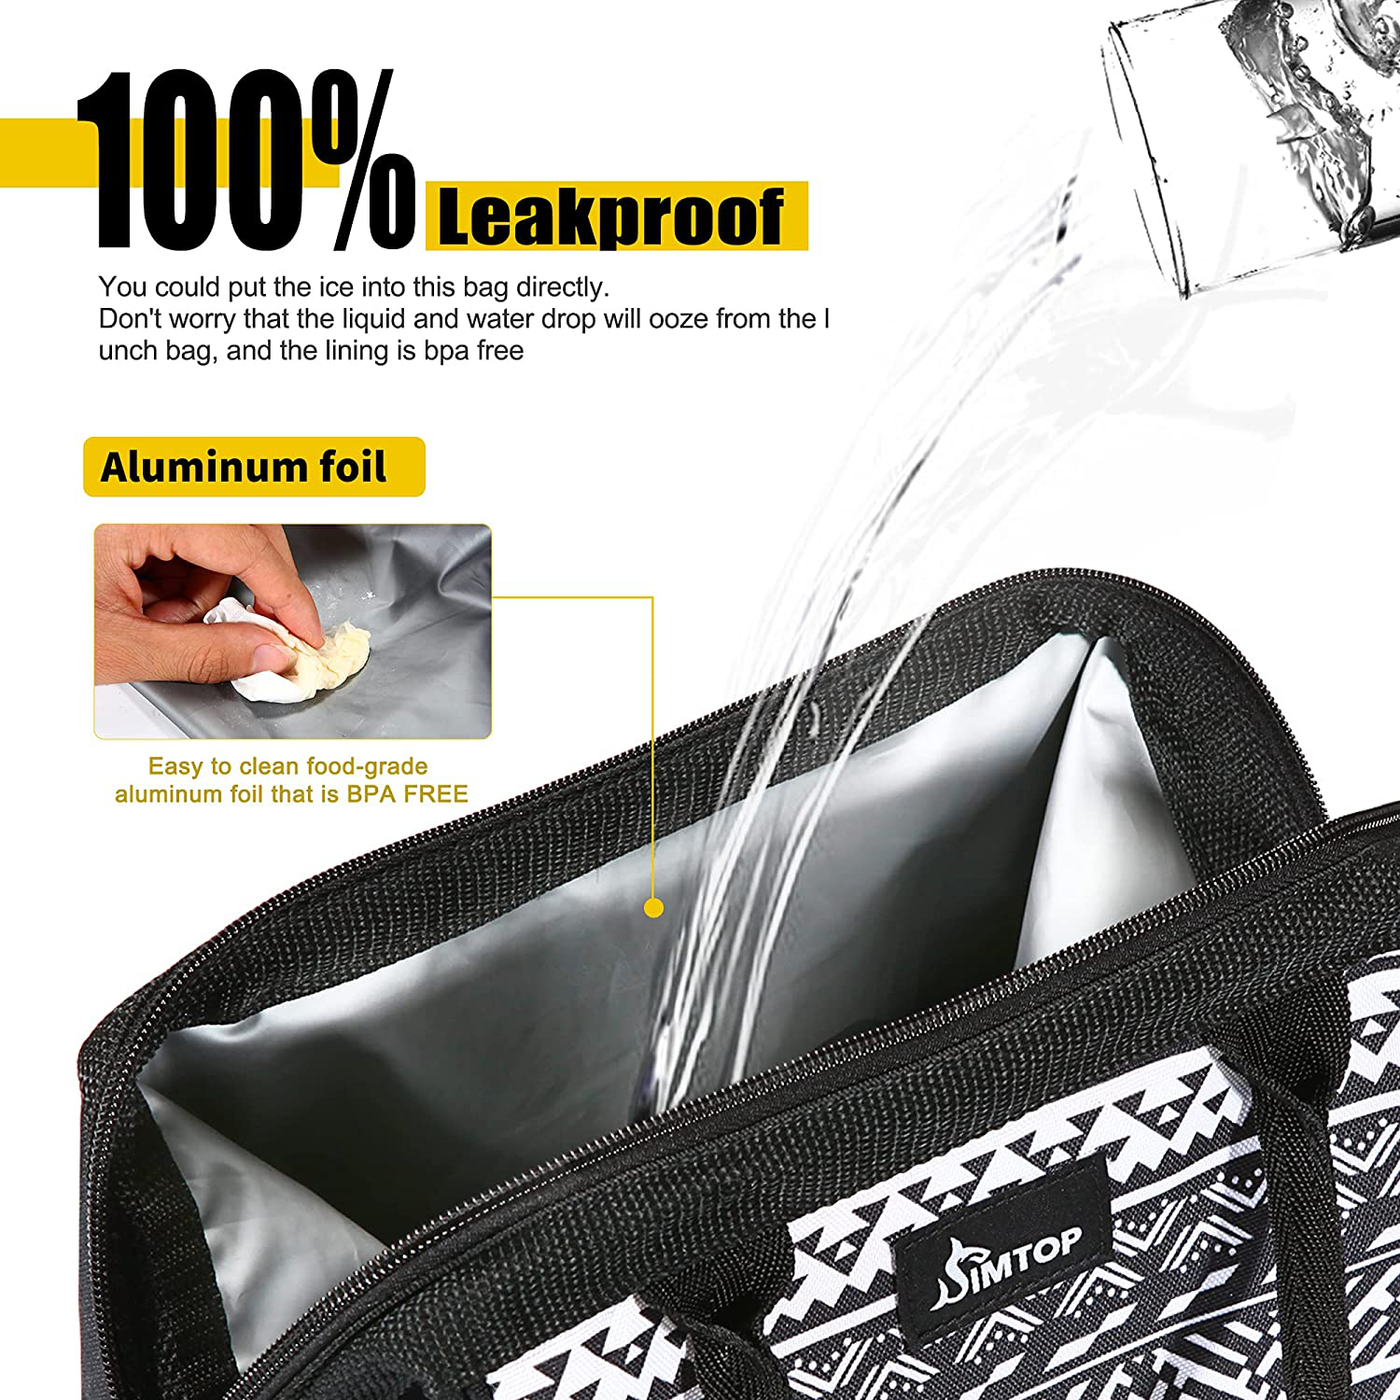 Lunch Bag, Wide-Open Insulated Cooler Lunch Box Tote Pail for Women/Men/Kids/Students, Cute Design, Leakproof, Easy Clean, Roomy Space Fit for Lunch Container Box, Utensils, Snacks, Drinks, Fruits